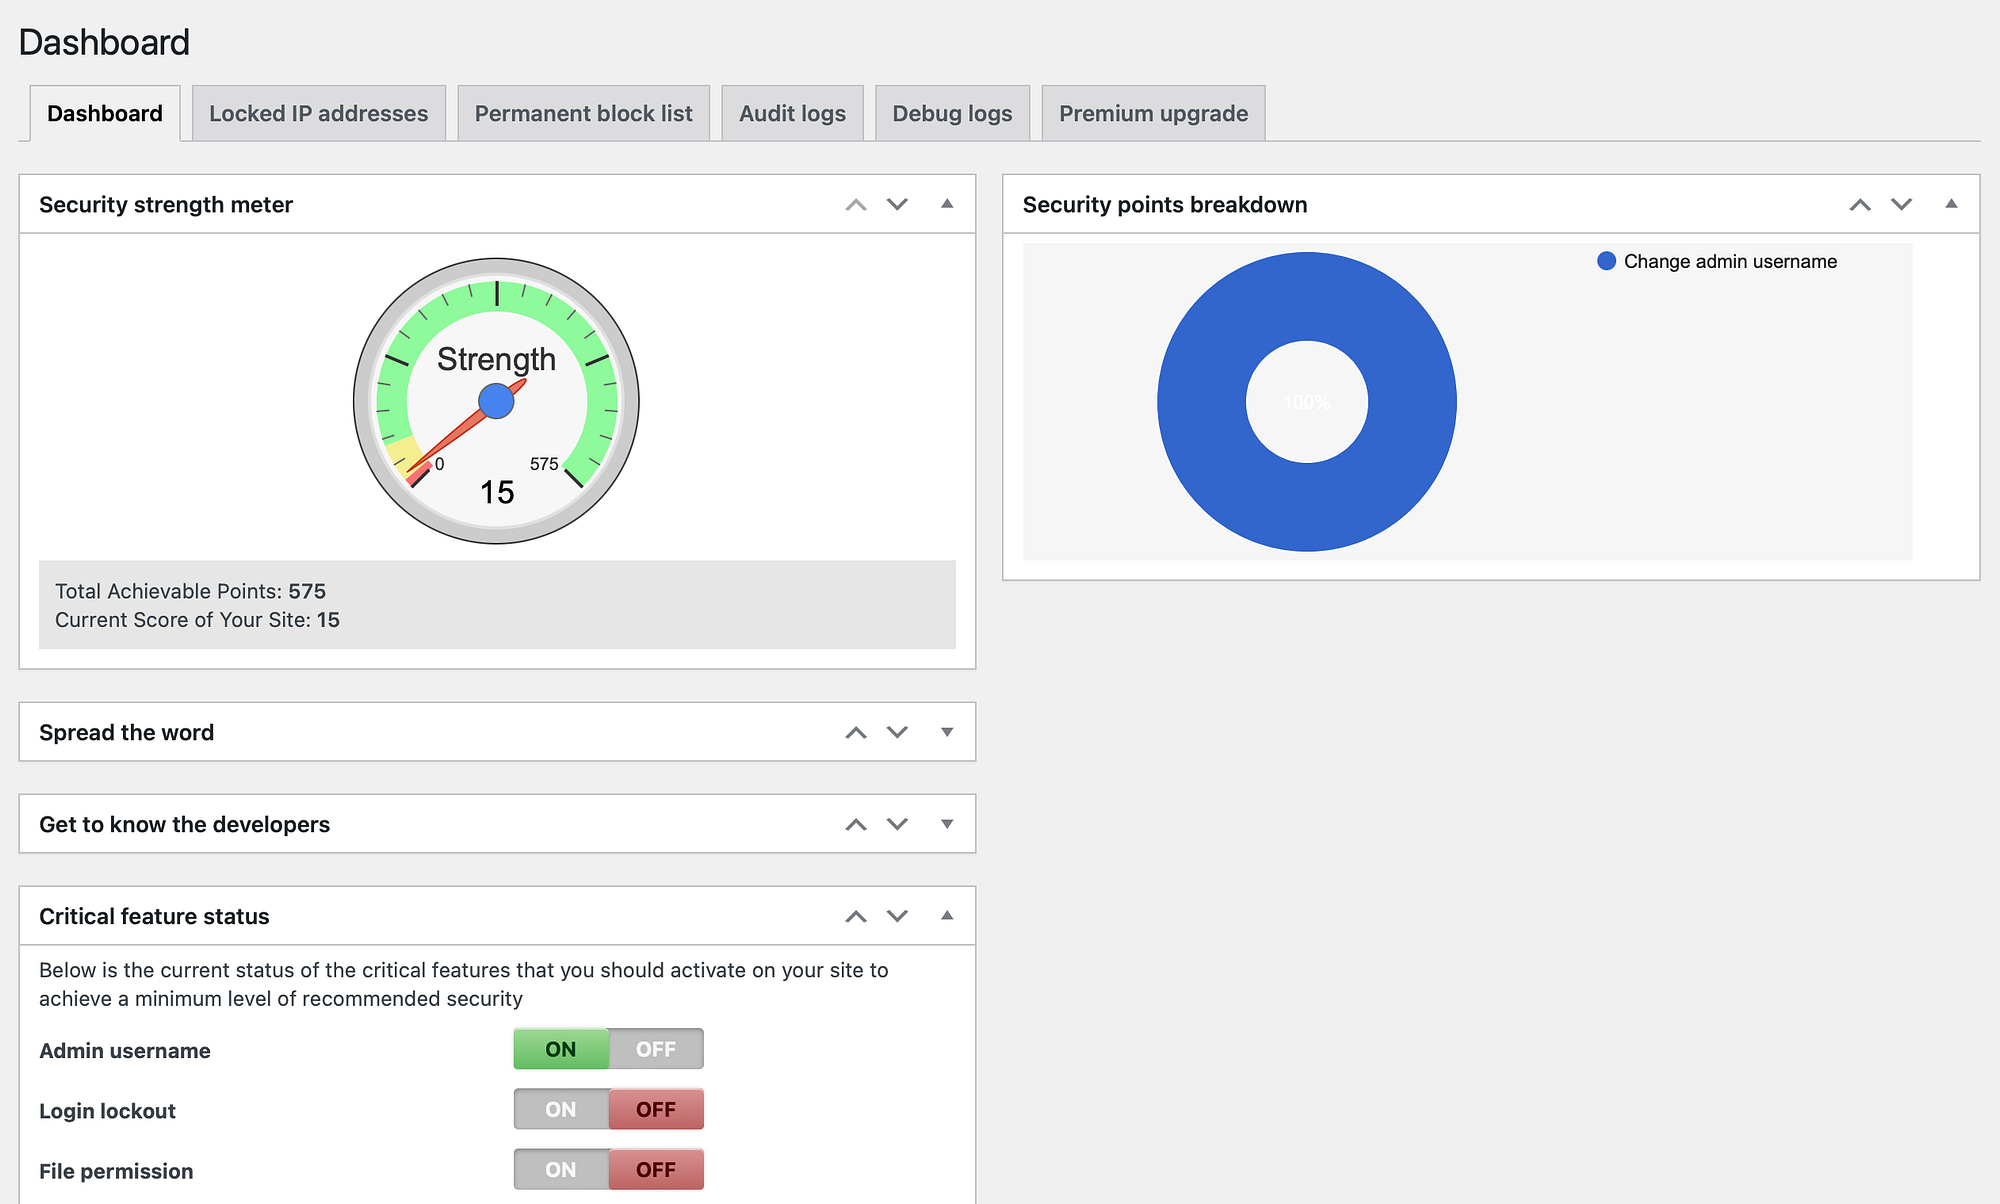 Wordfence vs All-In-One WP Security: All-In-One WP Security dashboard.